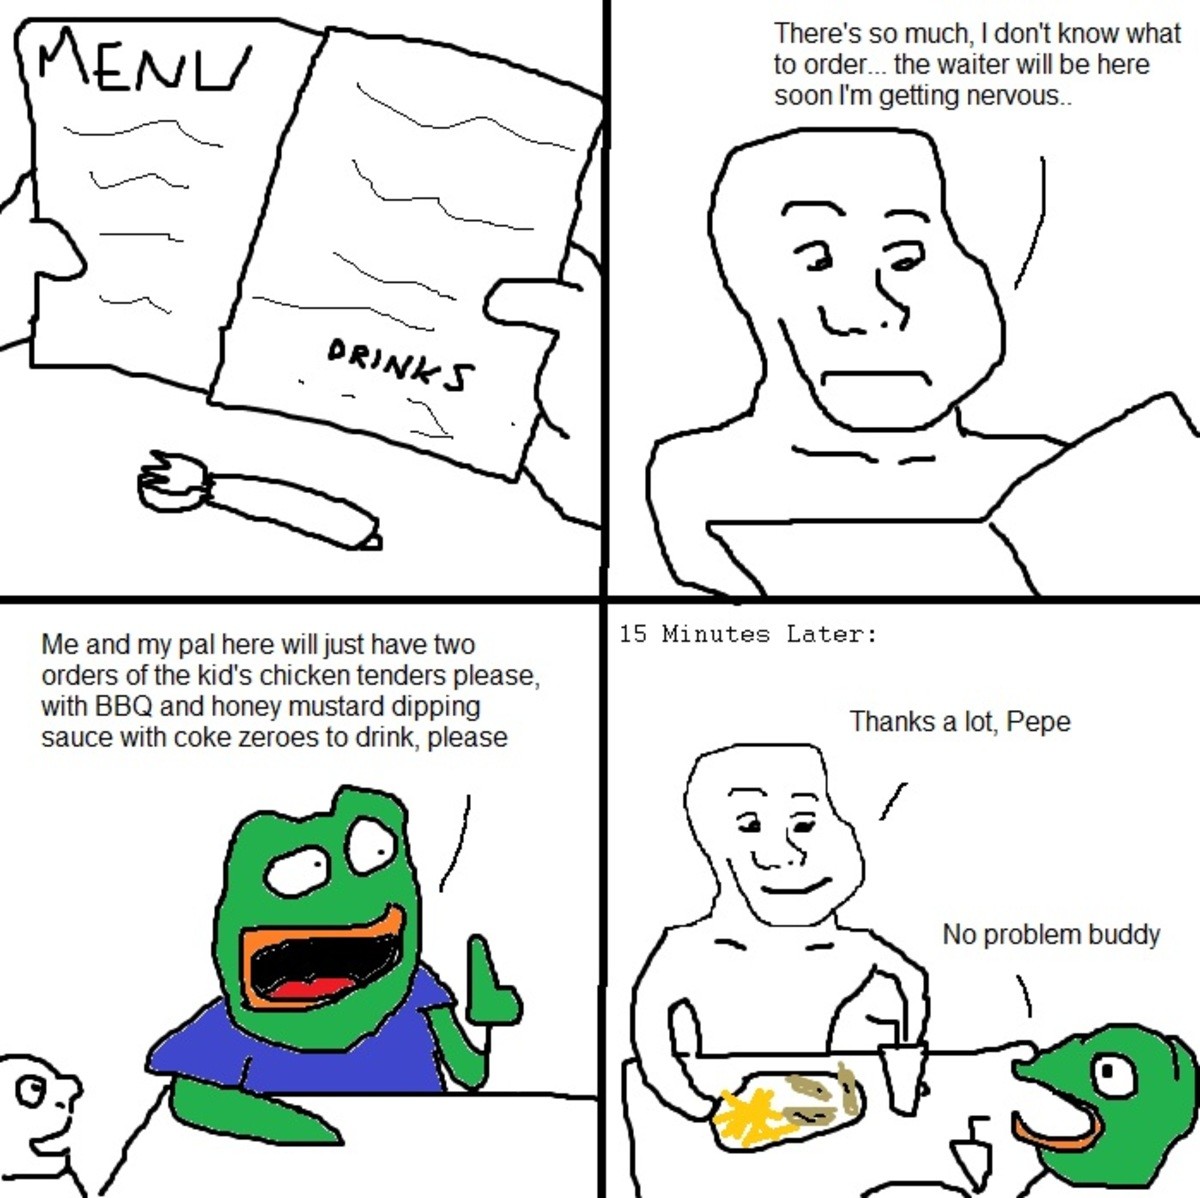 wholesome pepe and wojak dinner.